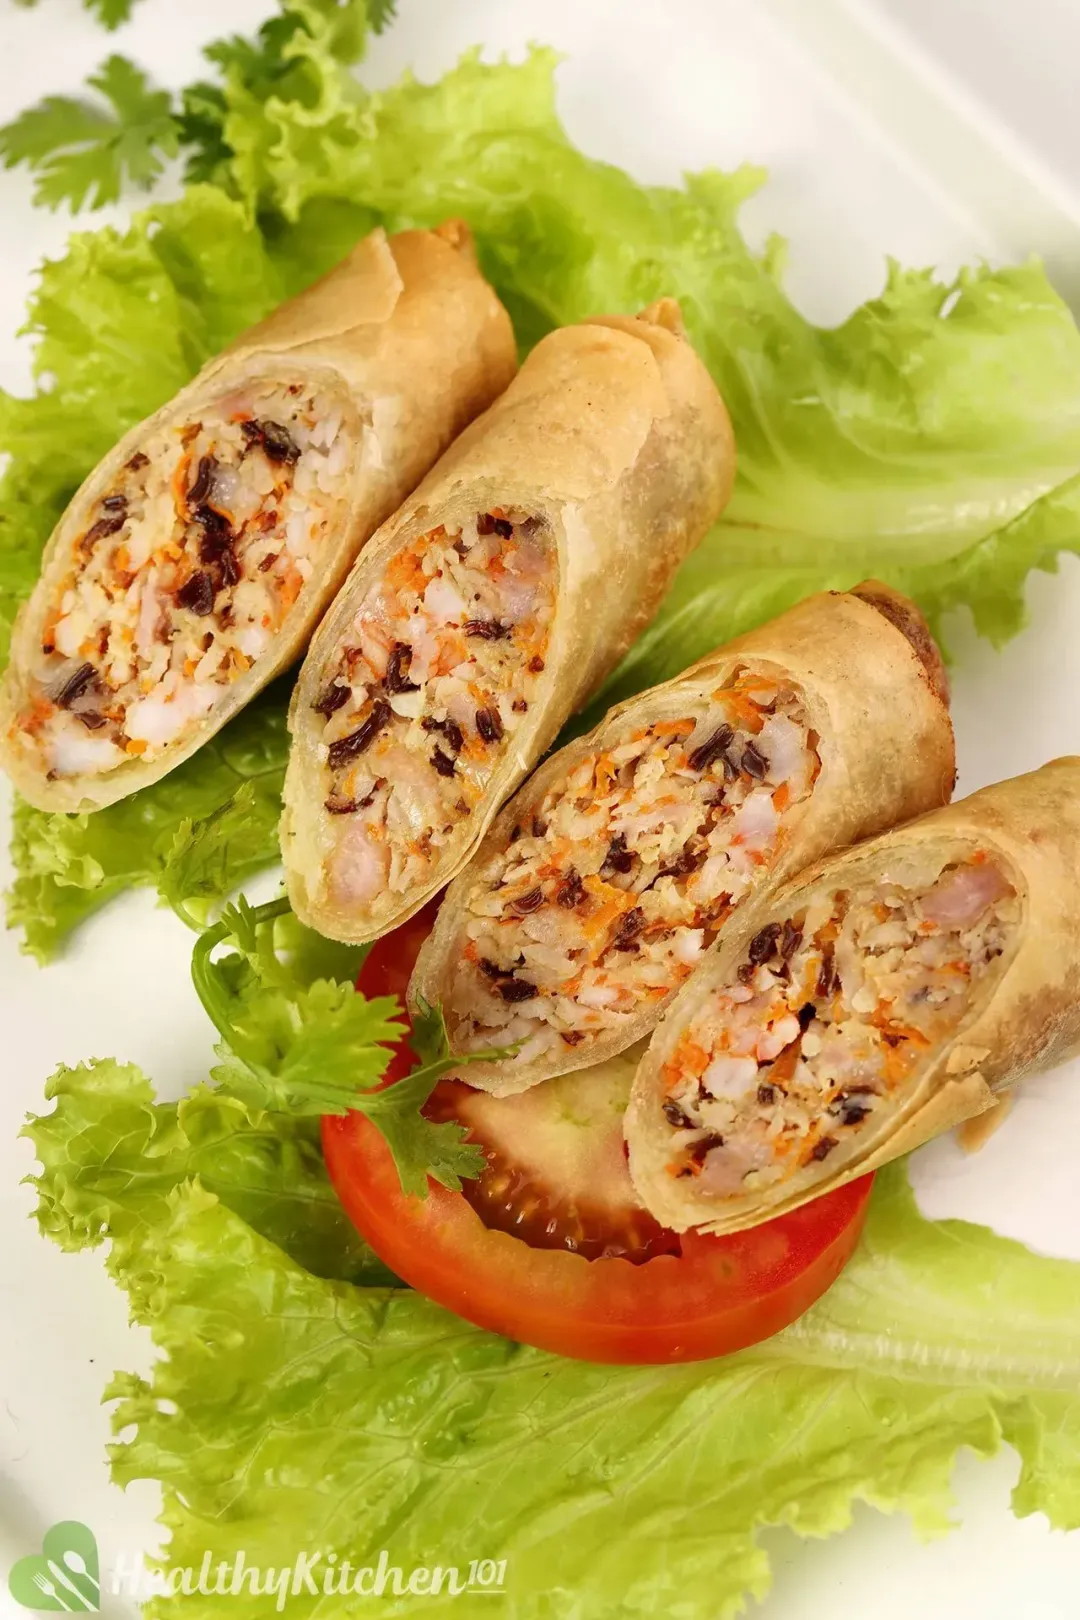 What to Serve With Egg Roll